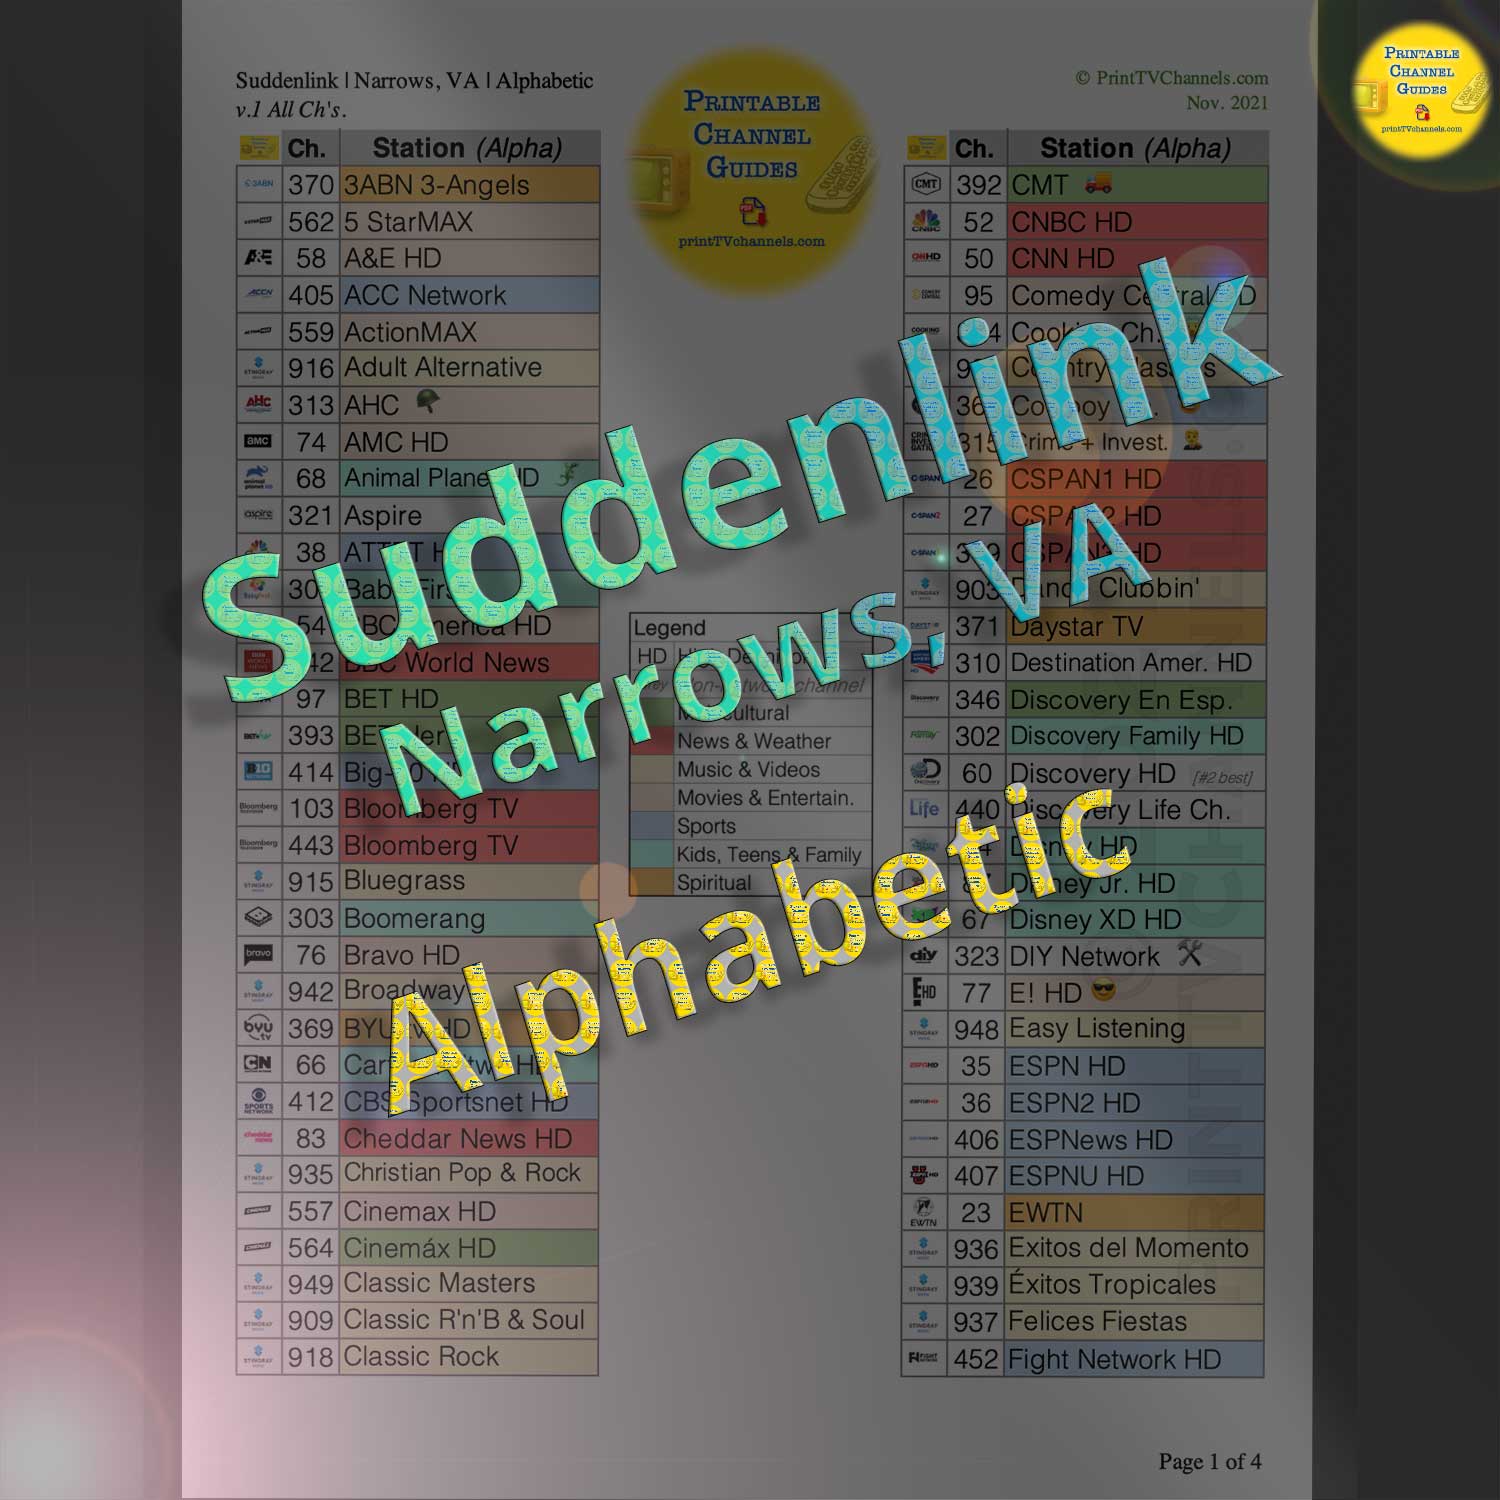 Suddenlink TV Guide Channel Lineup (alphabetic)